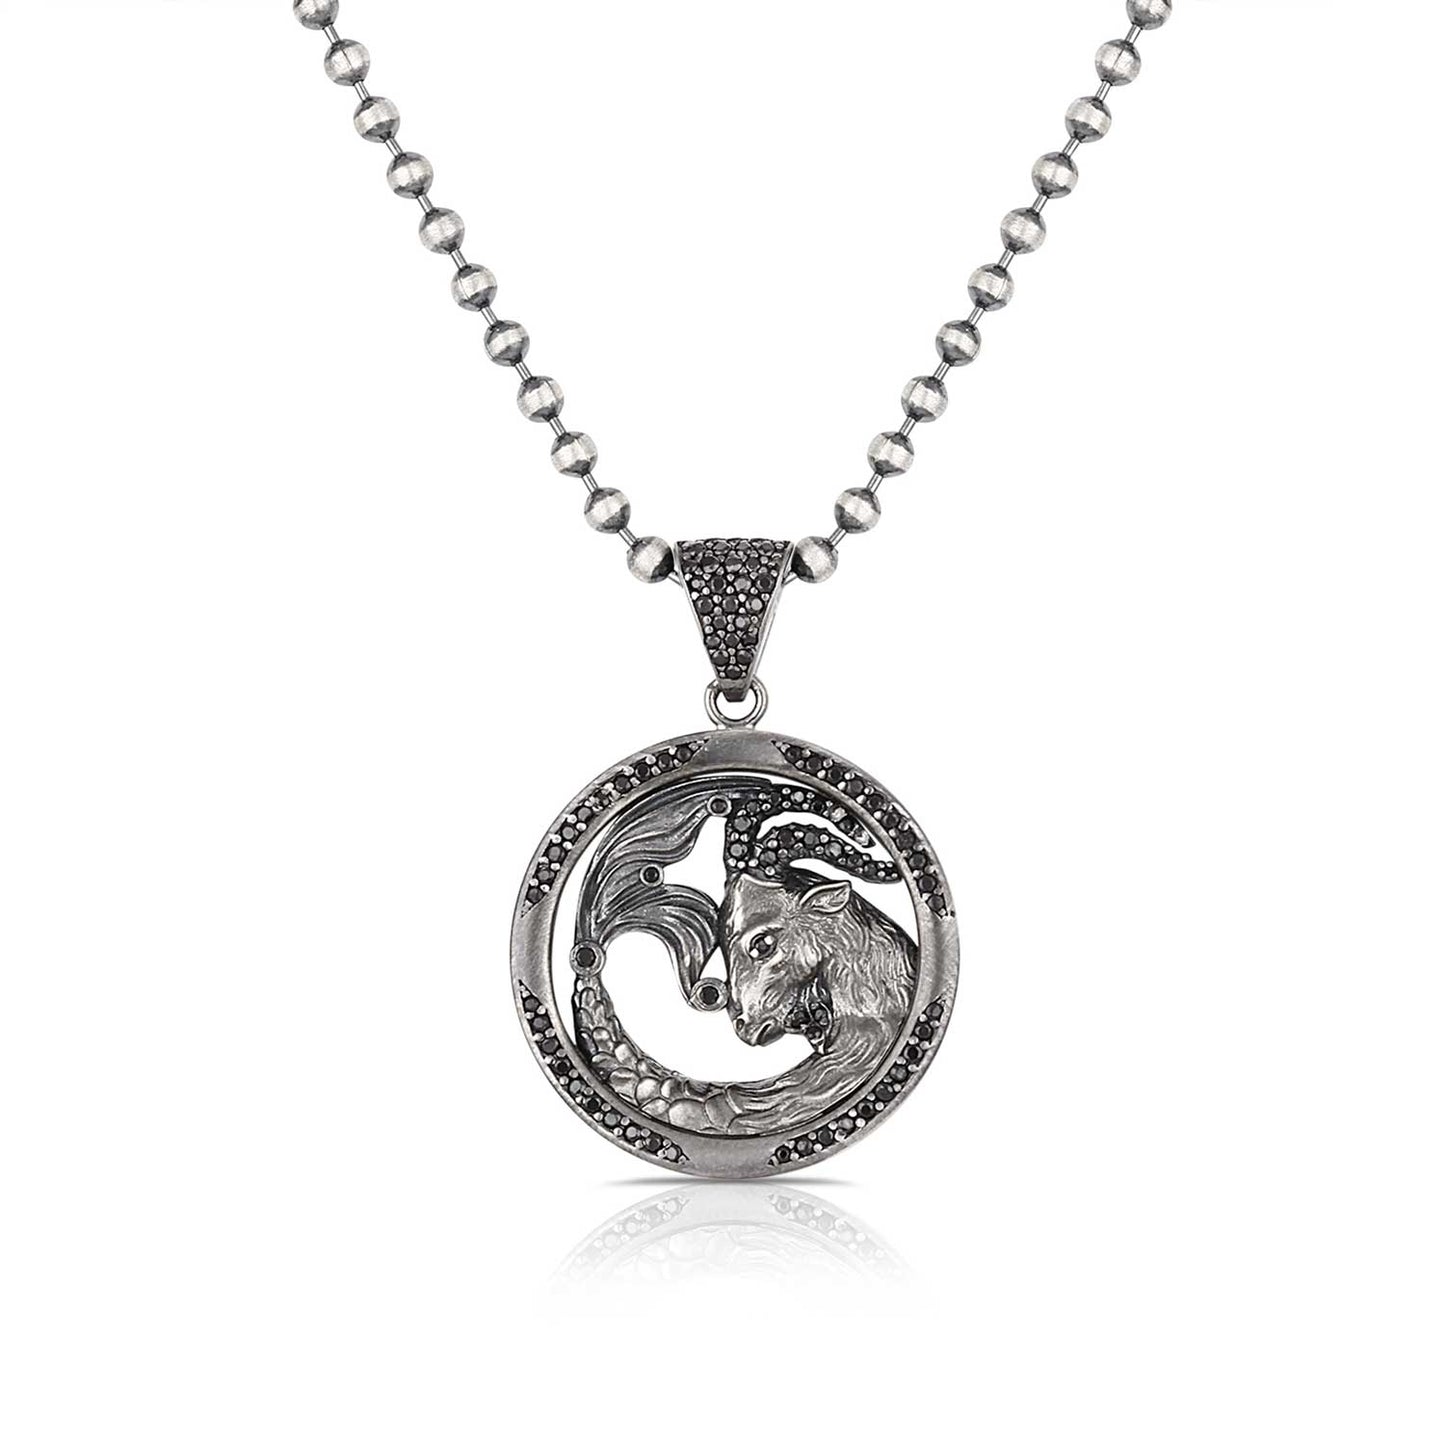 RARE PRINCE by CARAT SUTRA | Unique Capricorn Zodiac Designed Pendant Studded with Black Zircons | Unisex 925 Sterling Silver Oxidized Pendant | Men's Jewelry | With Certificate of Authenticity and 925 Hallmark - caratsutra